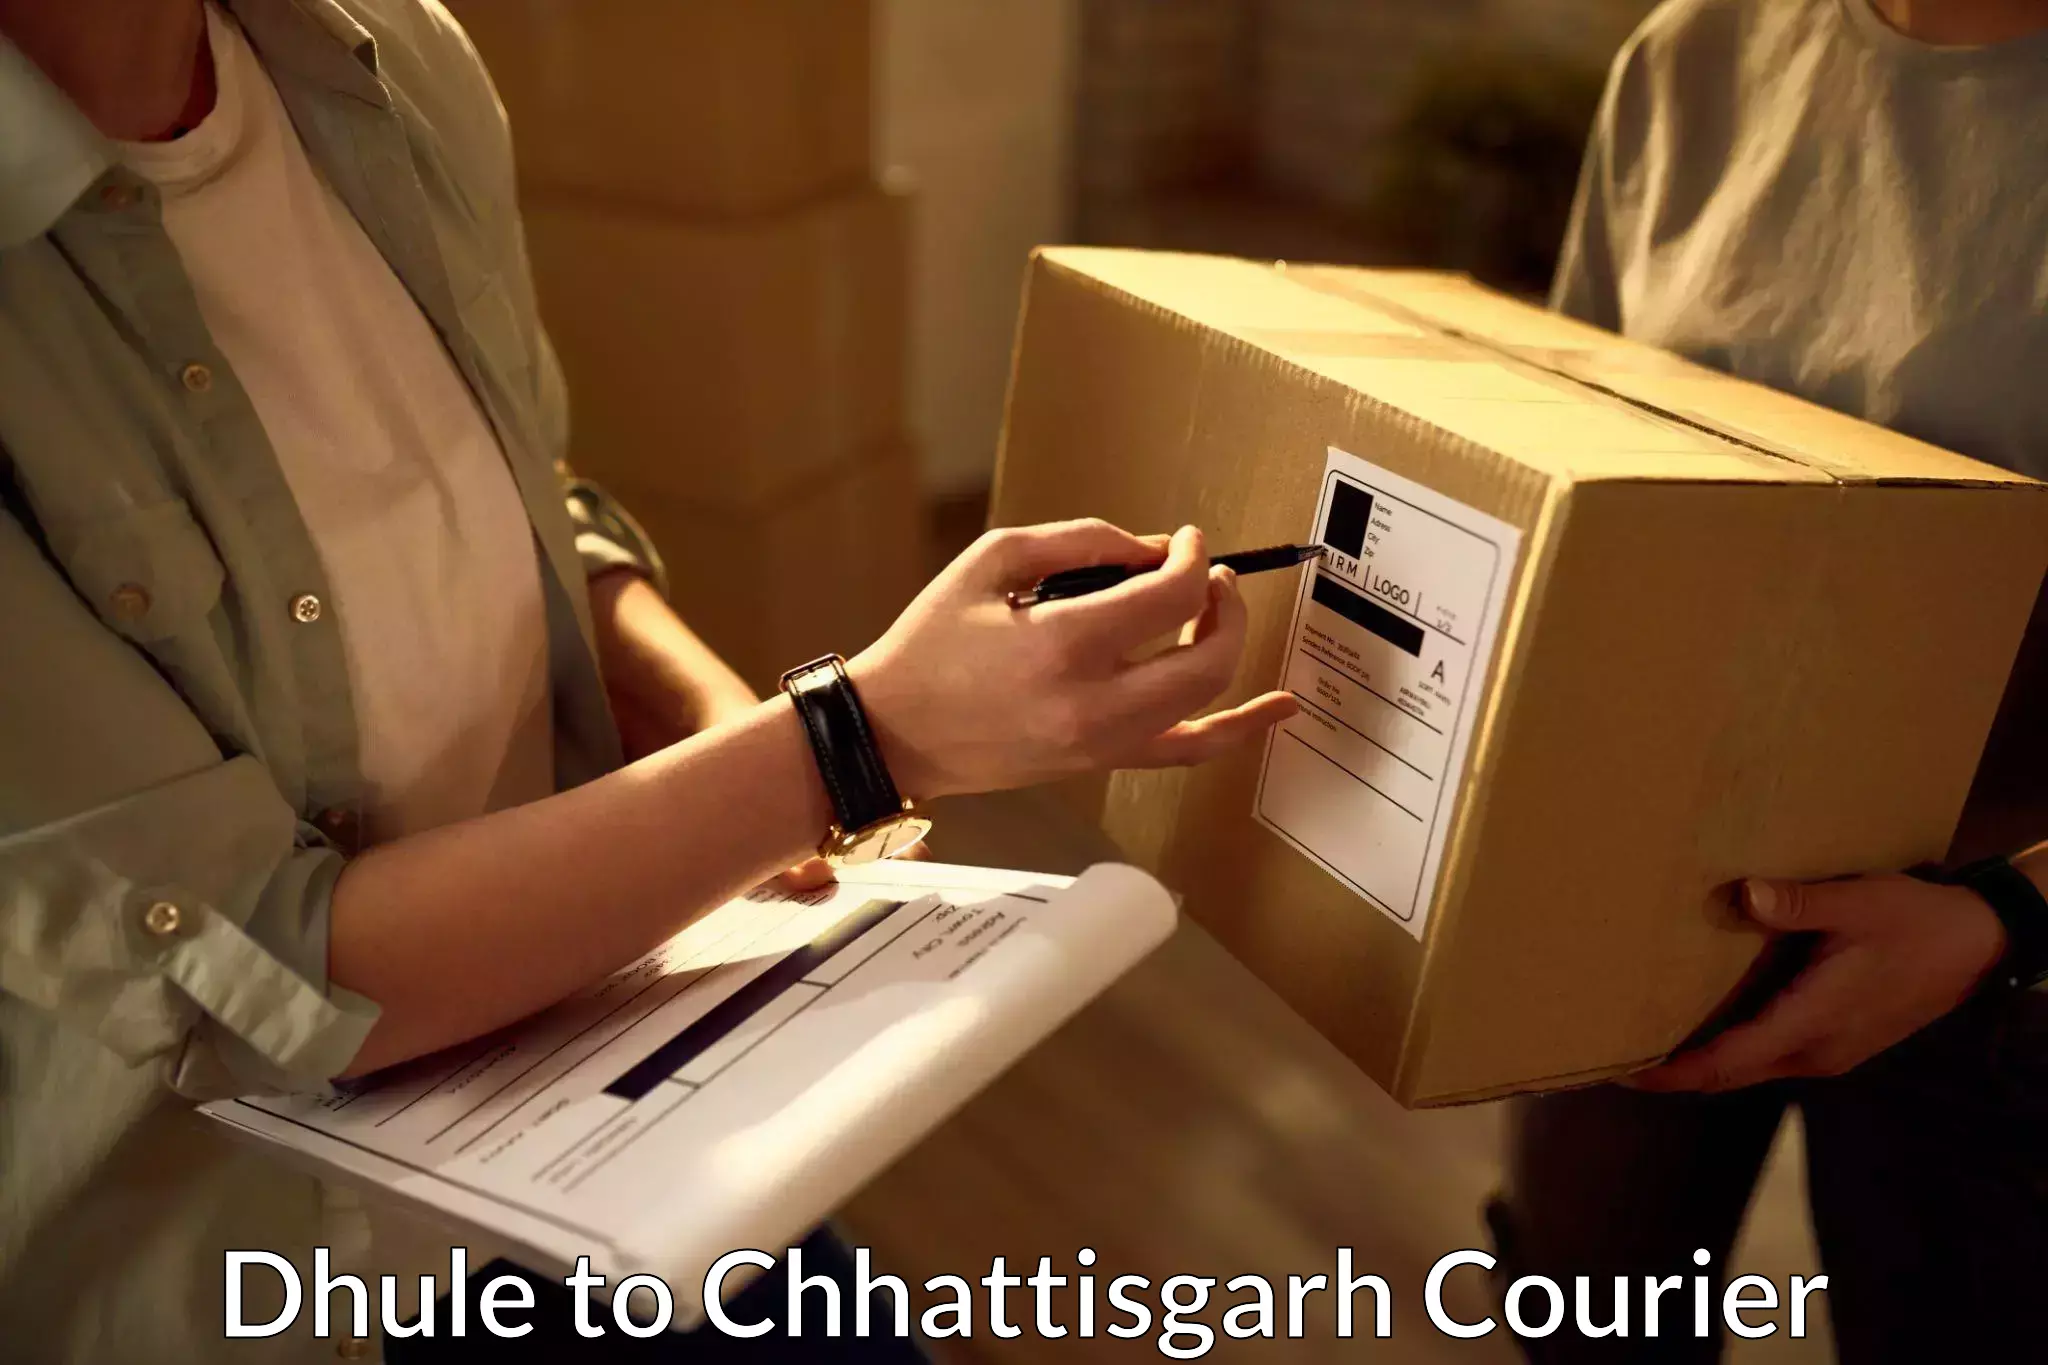 Expedited parcel delivery Dhule to Patna Chhattisgarh